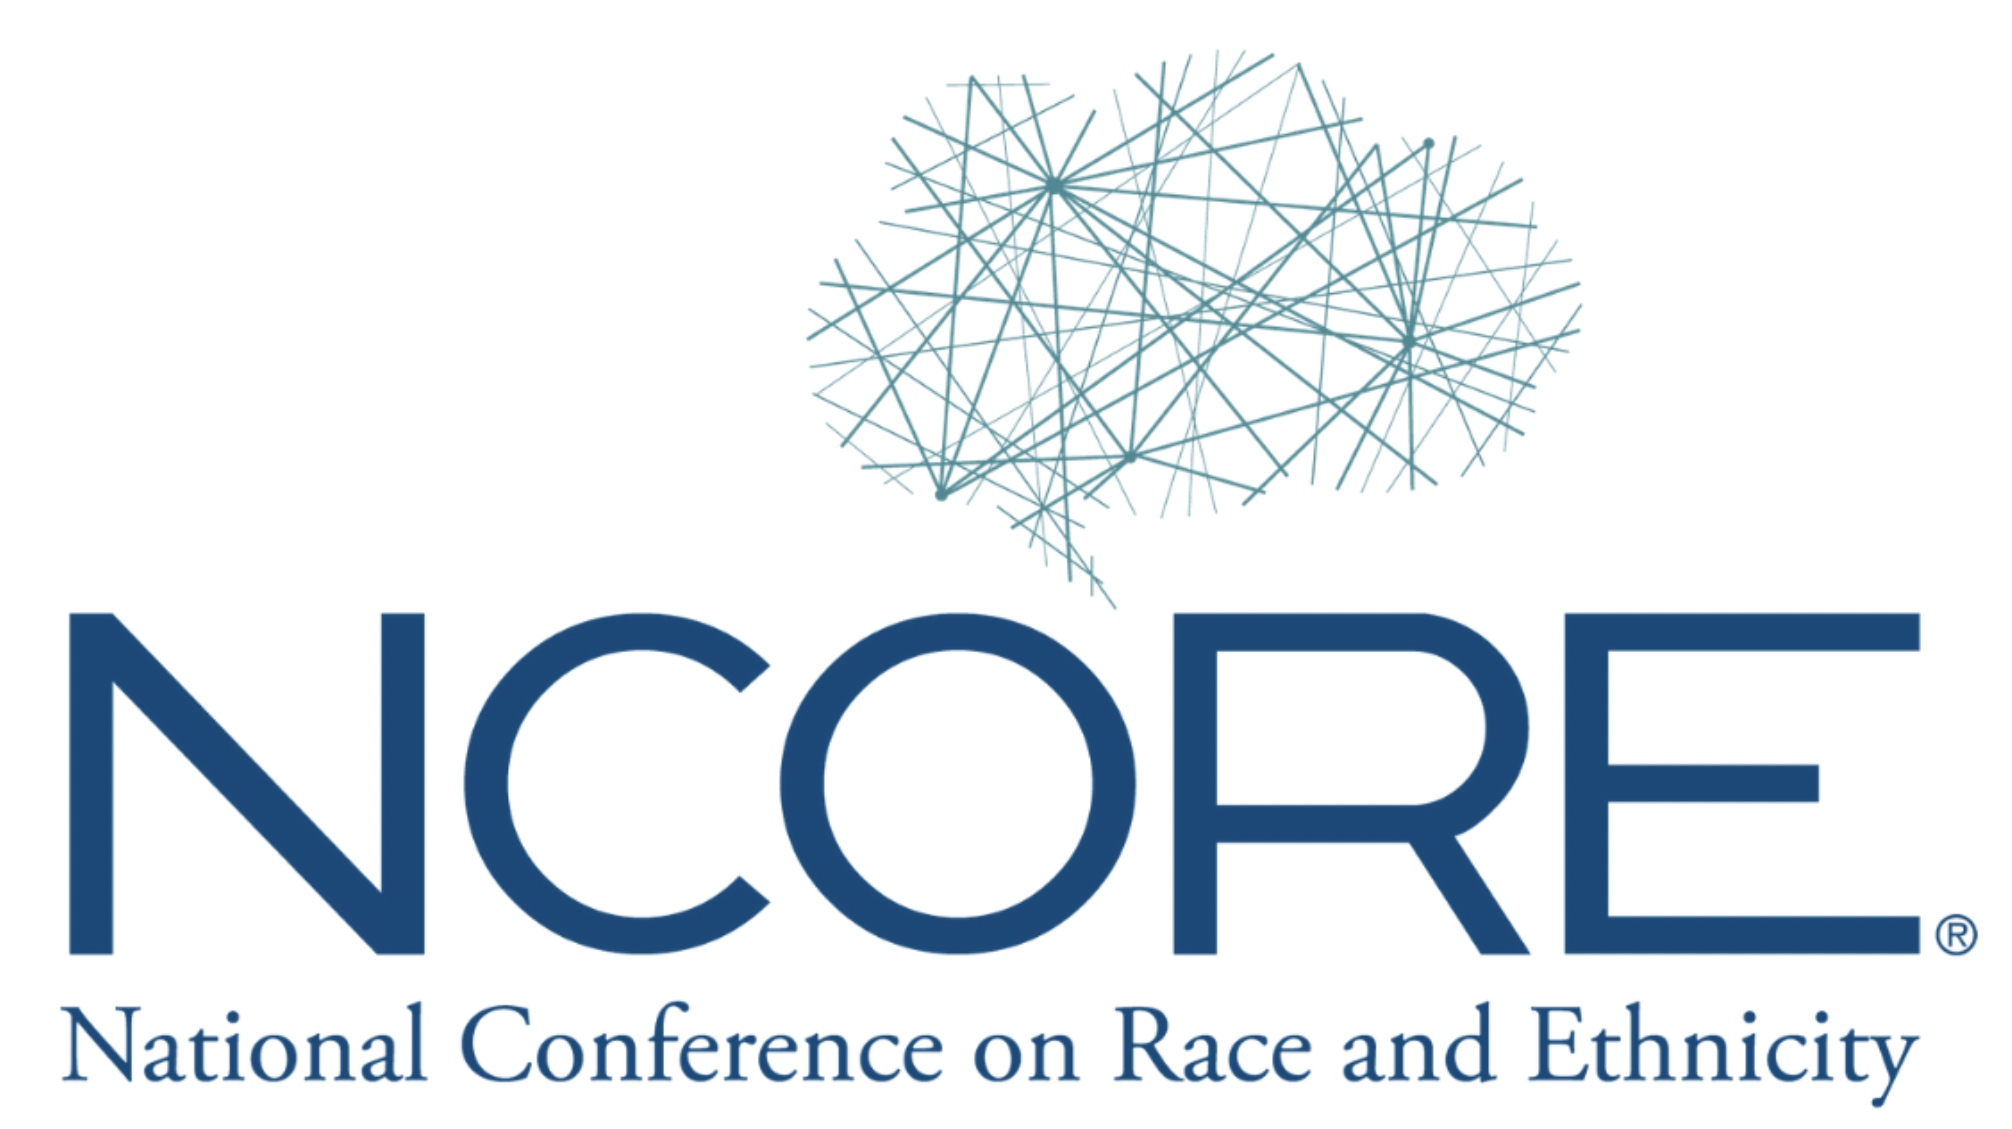 National Conference on Race and Ethnicity logo